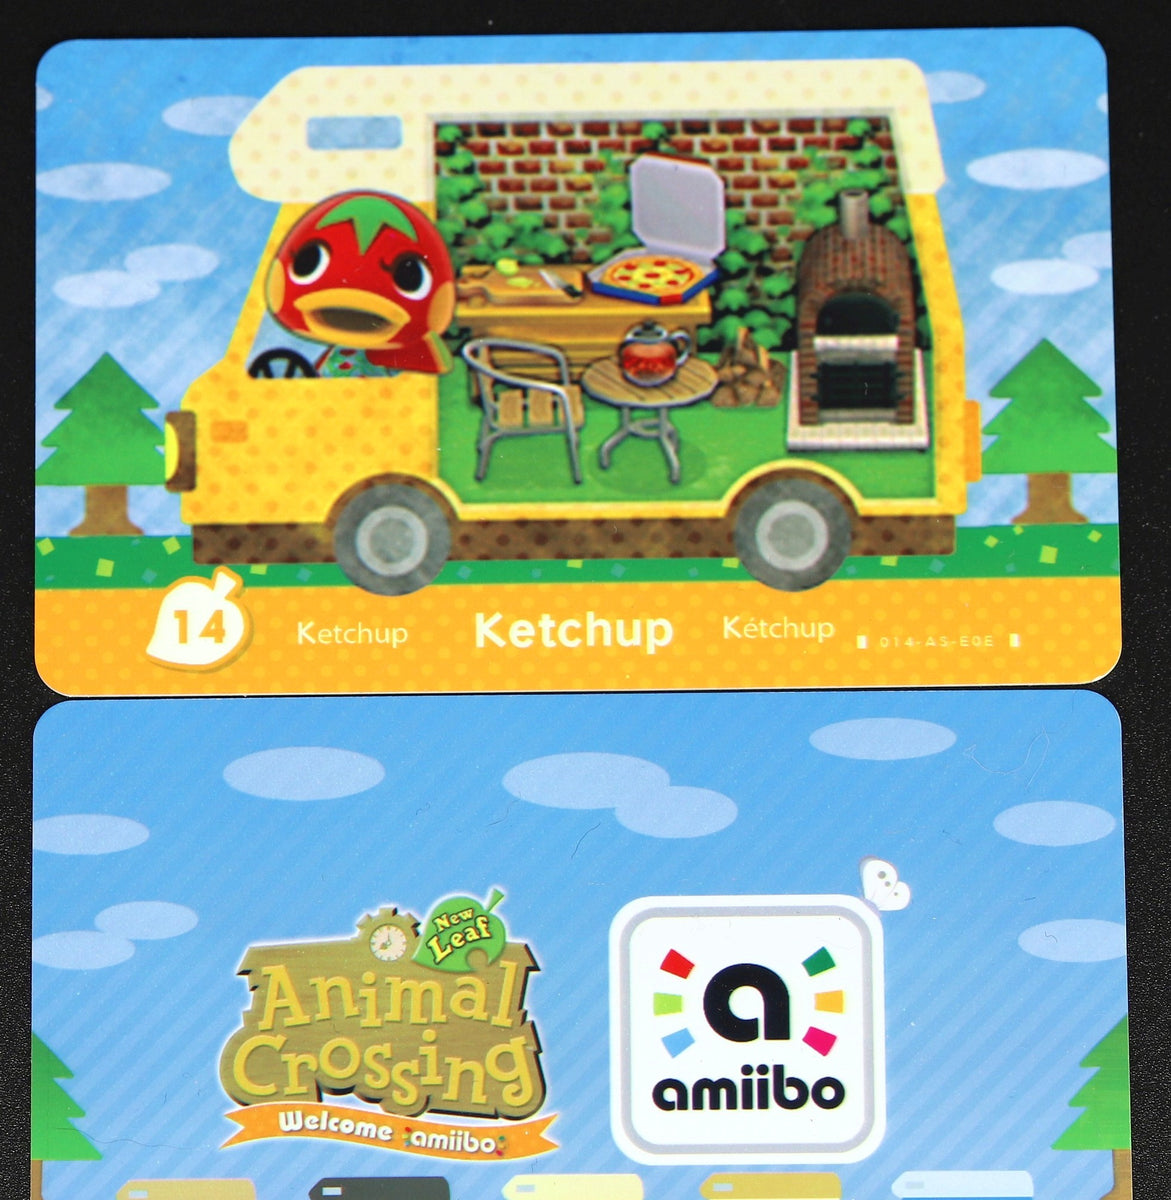 Every Animal Crossing Amiibo Card For New Horizons And New Leaf